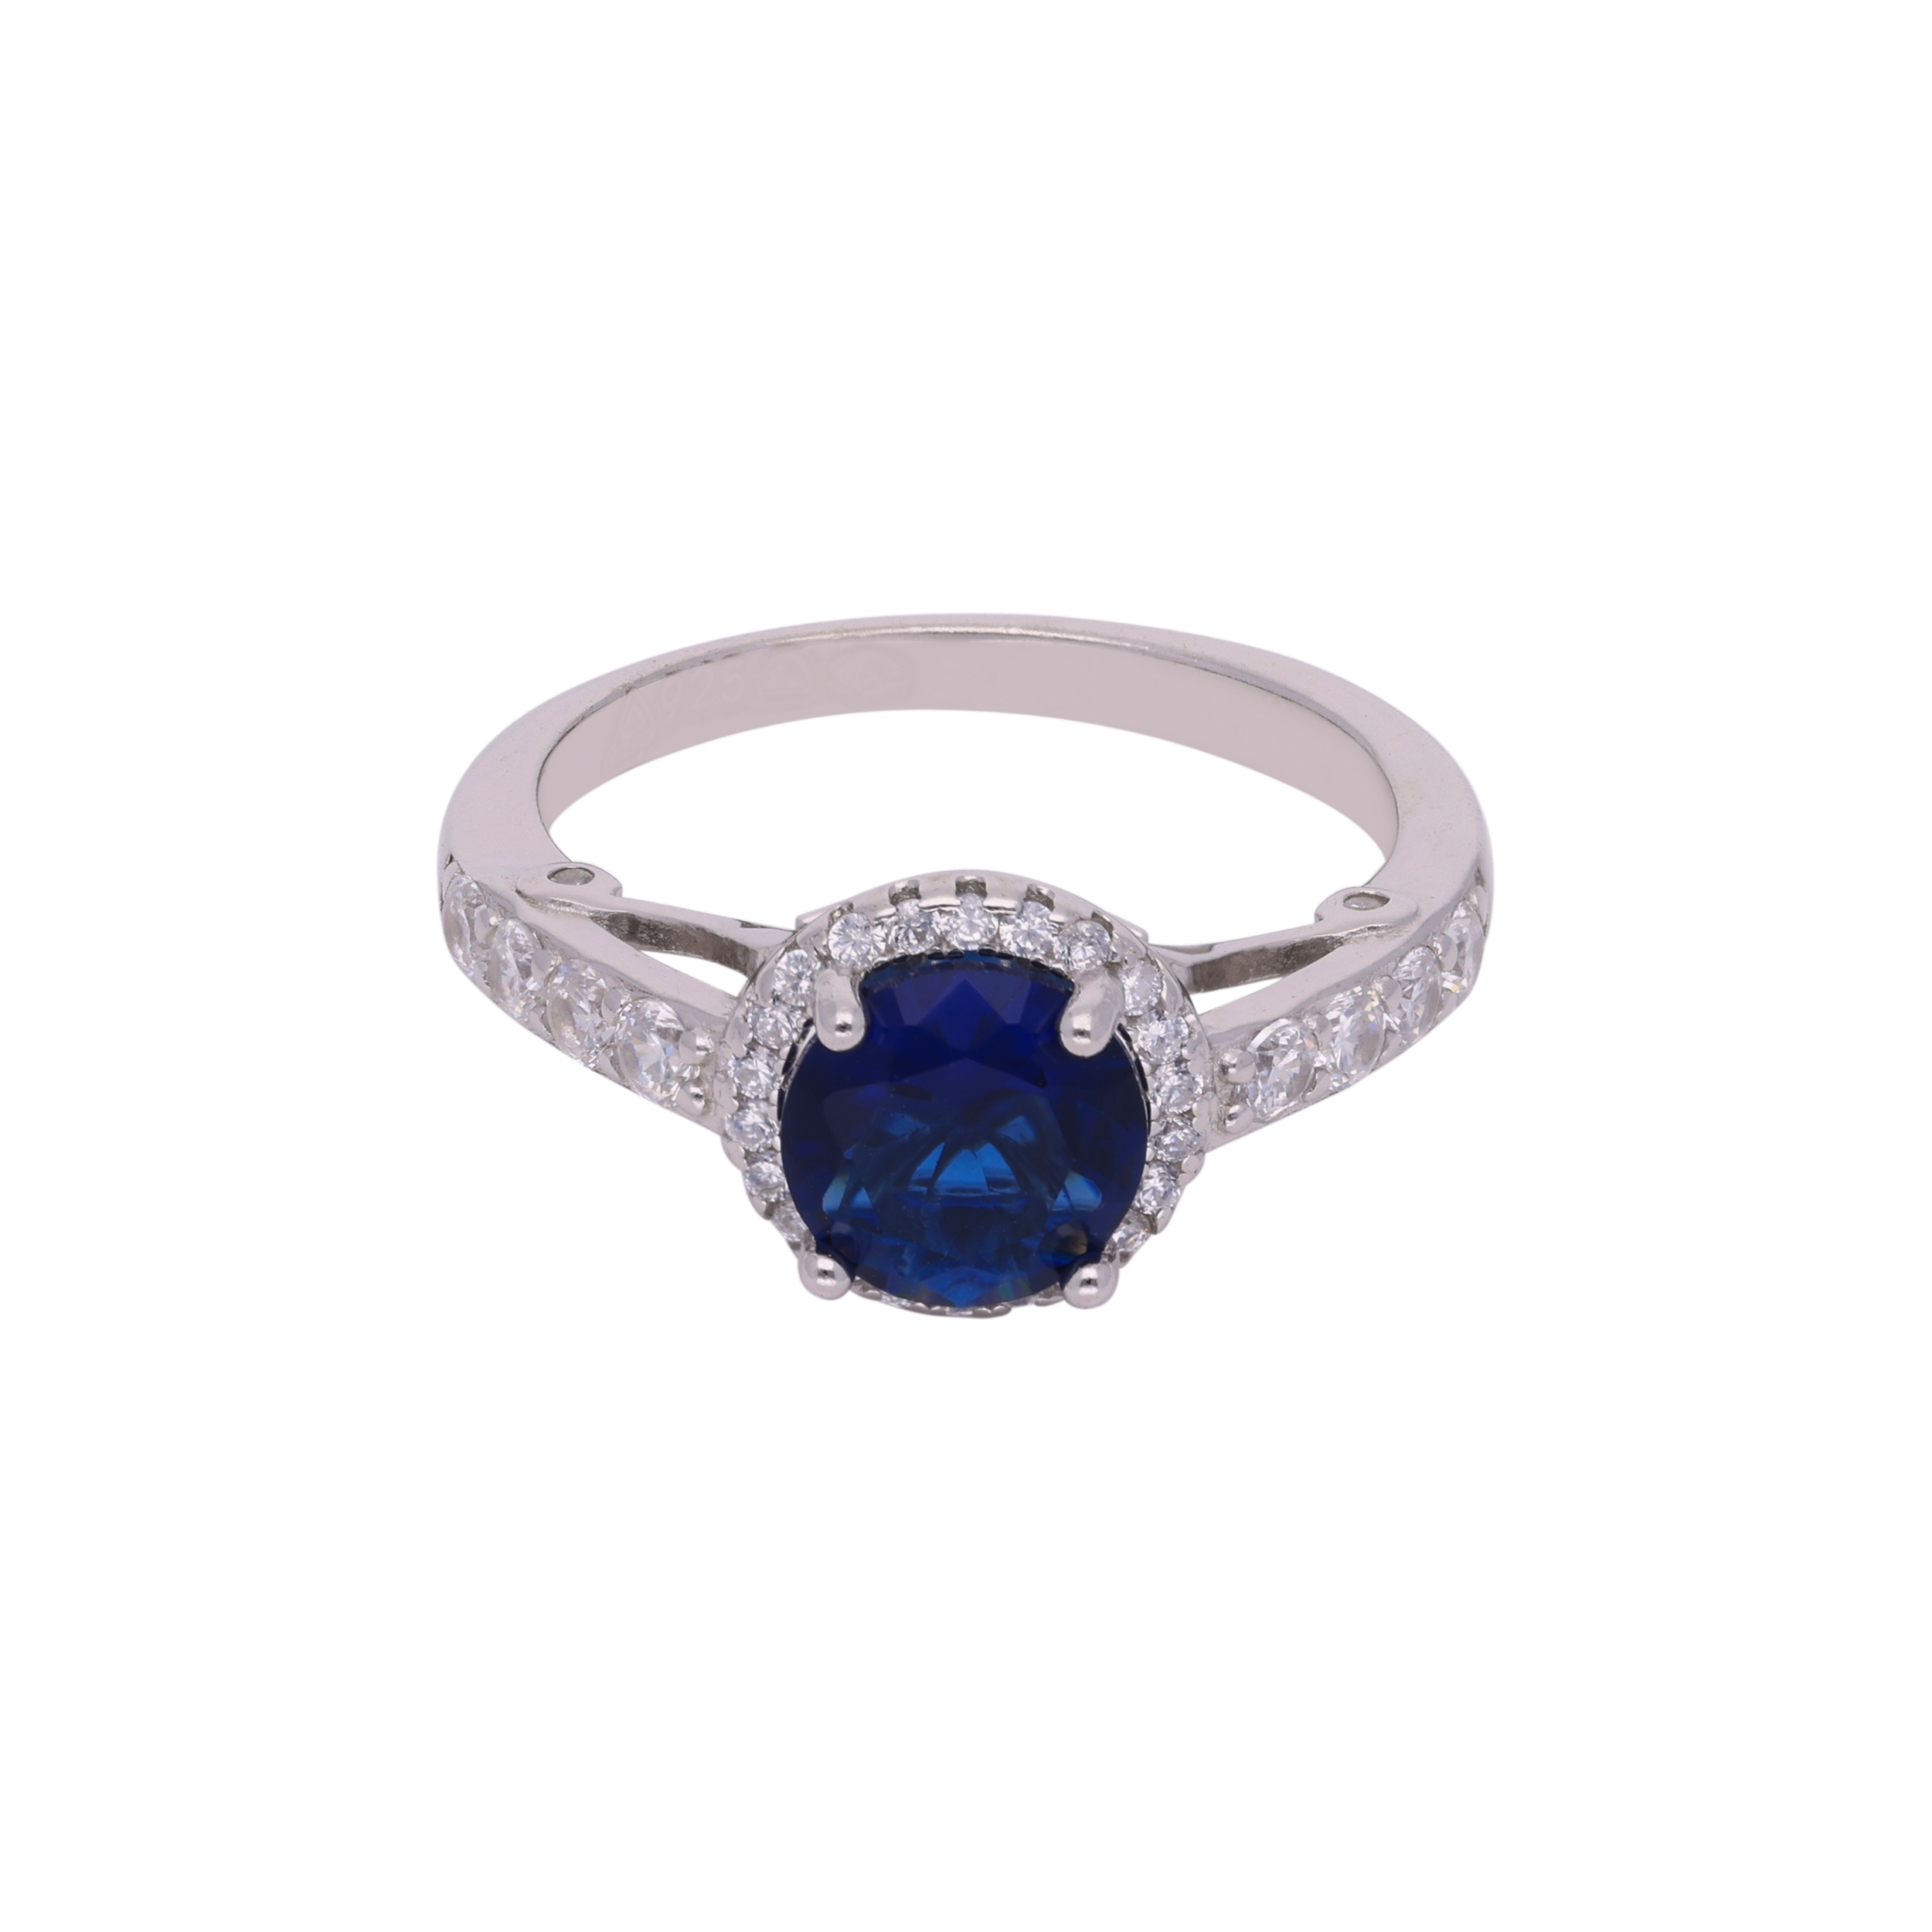 Azure Elegance: Sterling Silver Solitaire Ring with Blue Stone and Cubic Zircon Accents | SKU : 0003114506